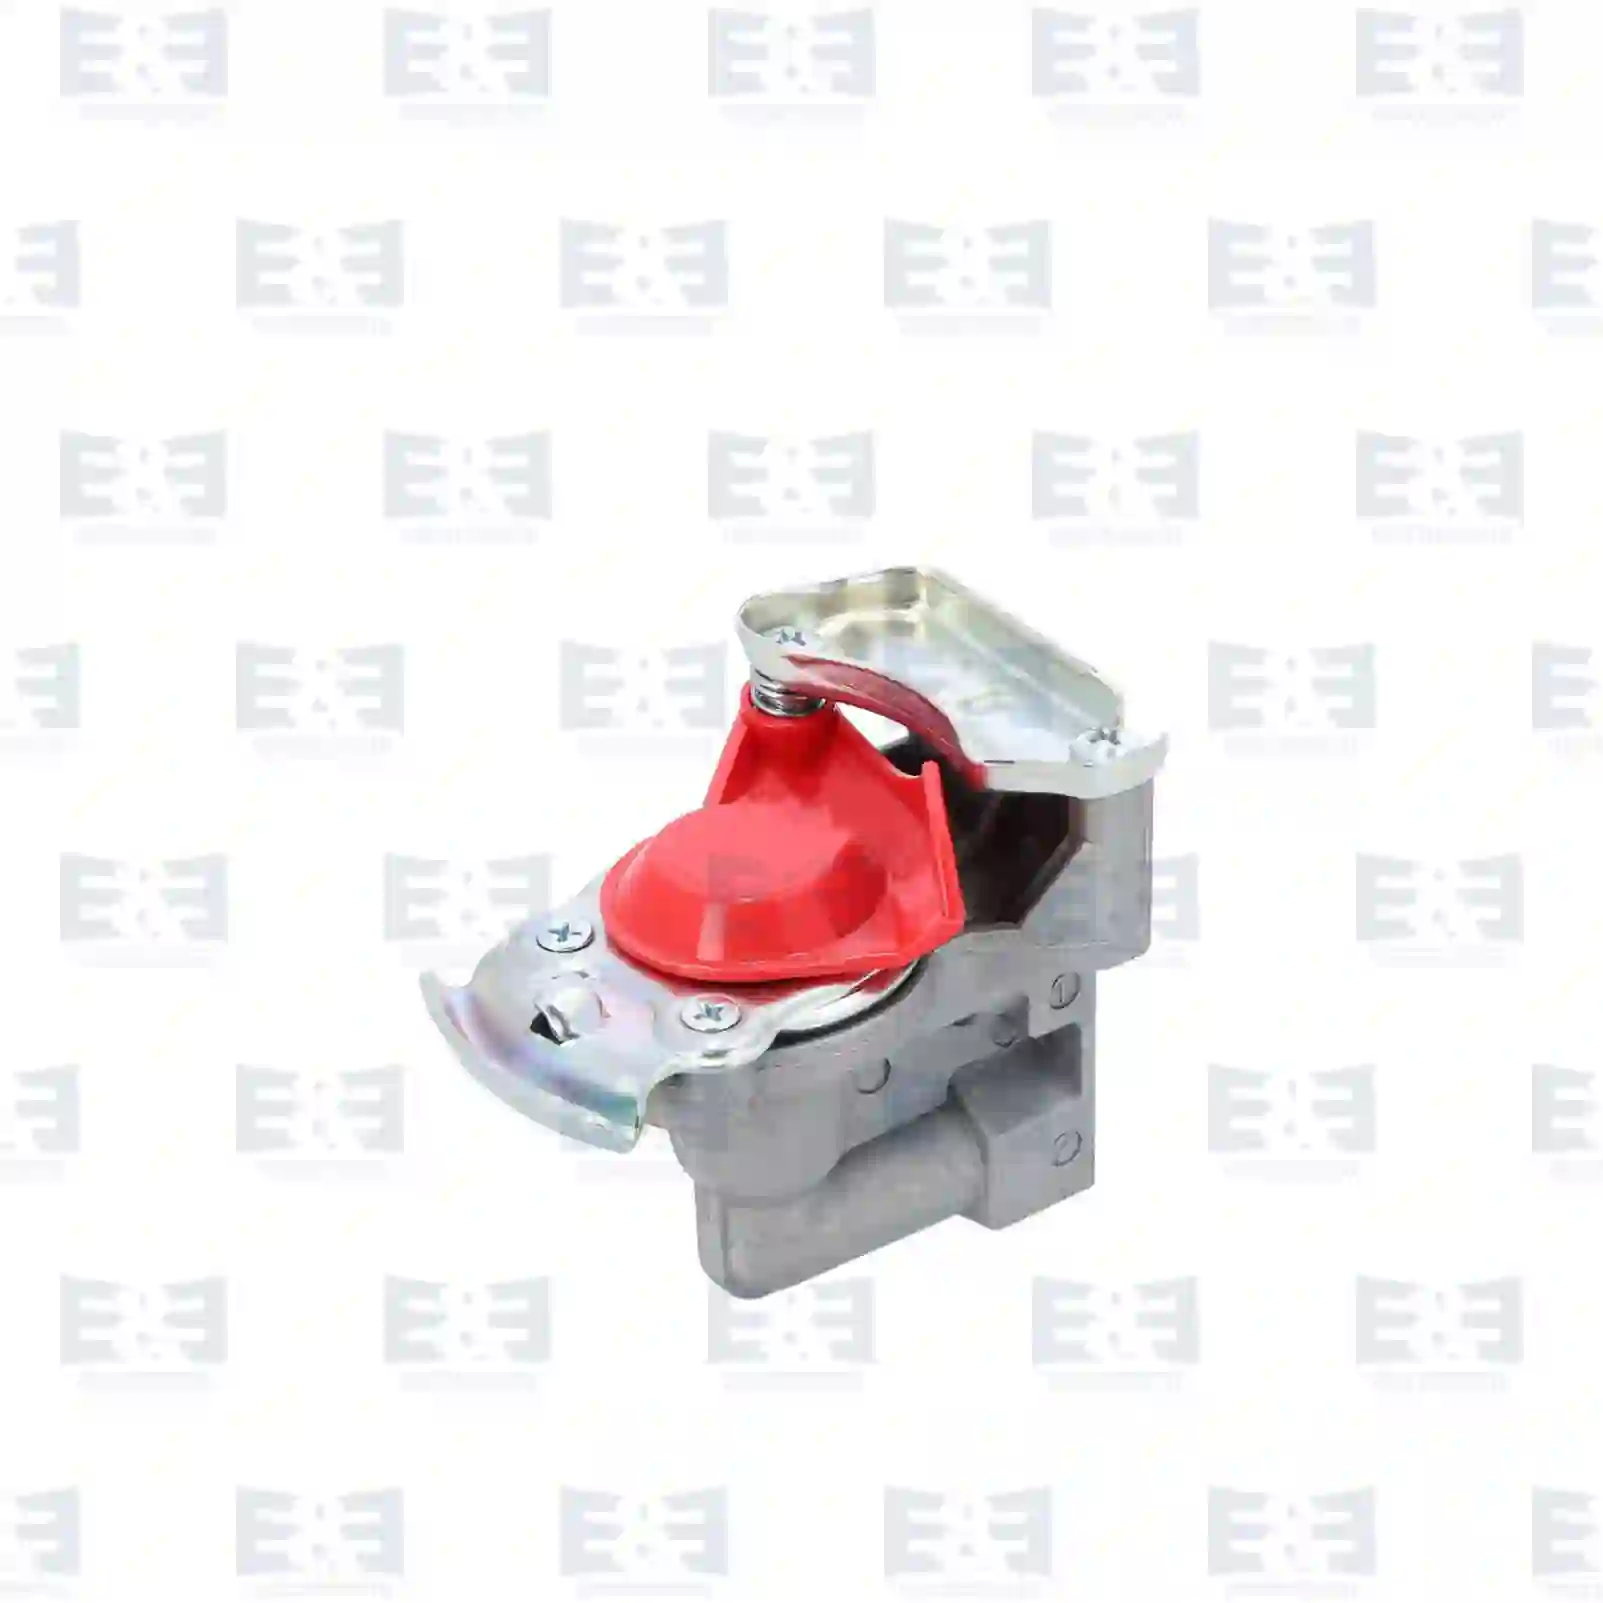  Palm coupling, red lid || E&E Truck Spare Parts | Truck Spare Parts, Auotomotive Spare Parts